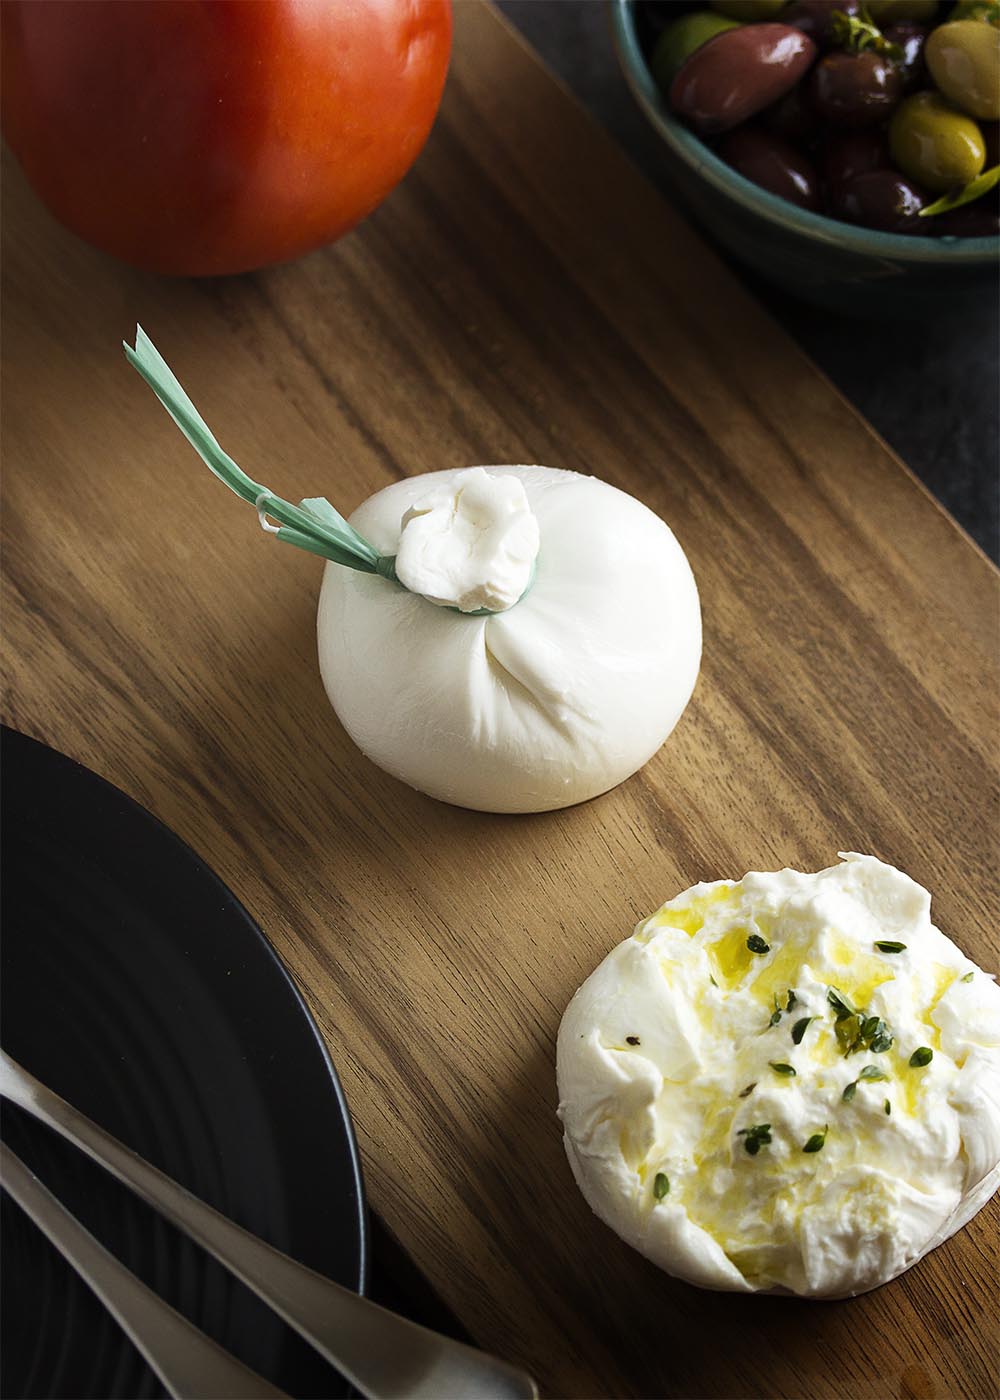 What is burrata? How do you cook burrata? These questions and more answered in this ingredient spotlight on burrata cheese. | justalittlebitofbacon.com